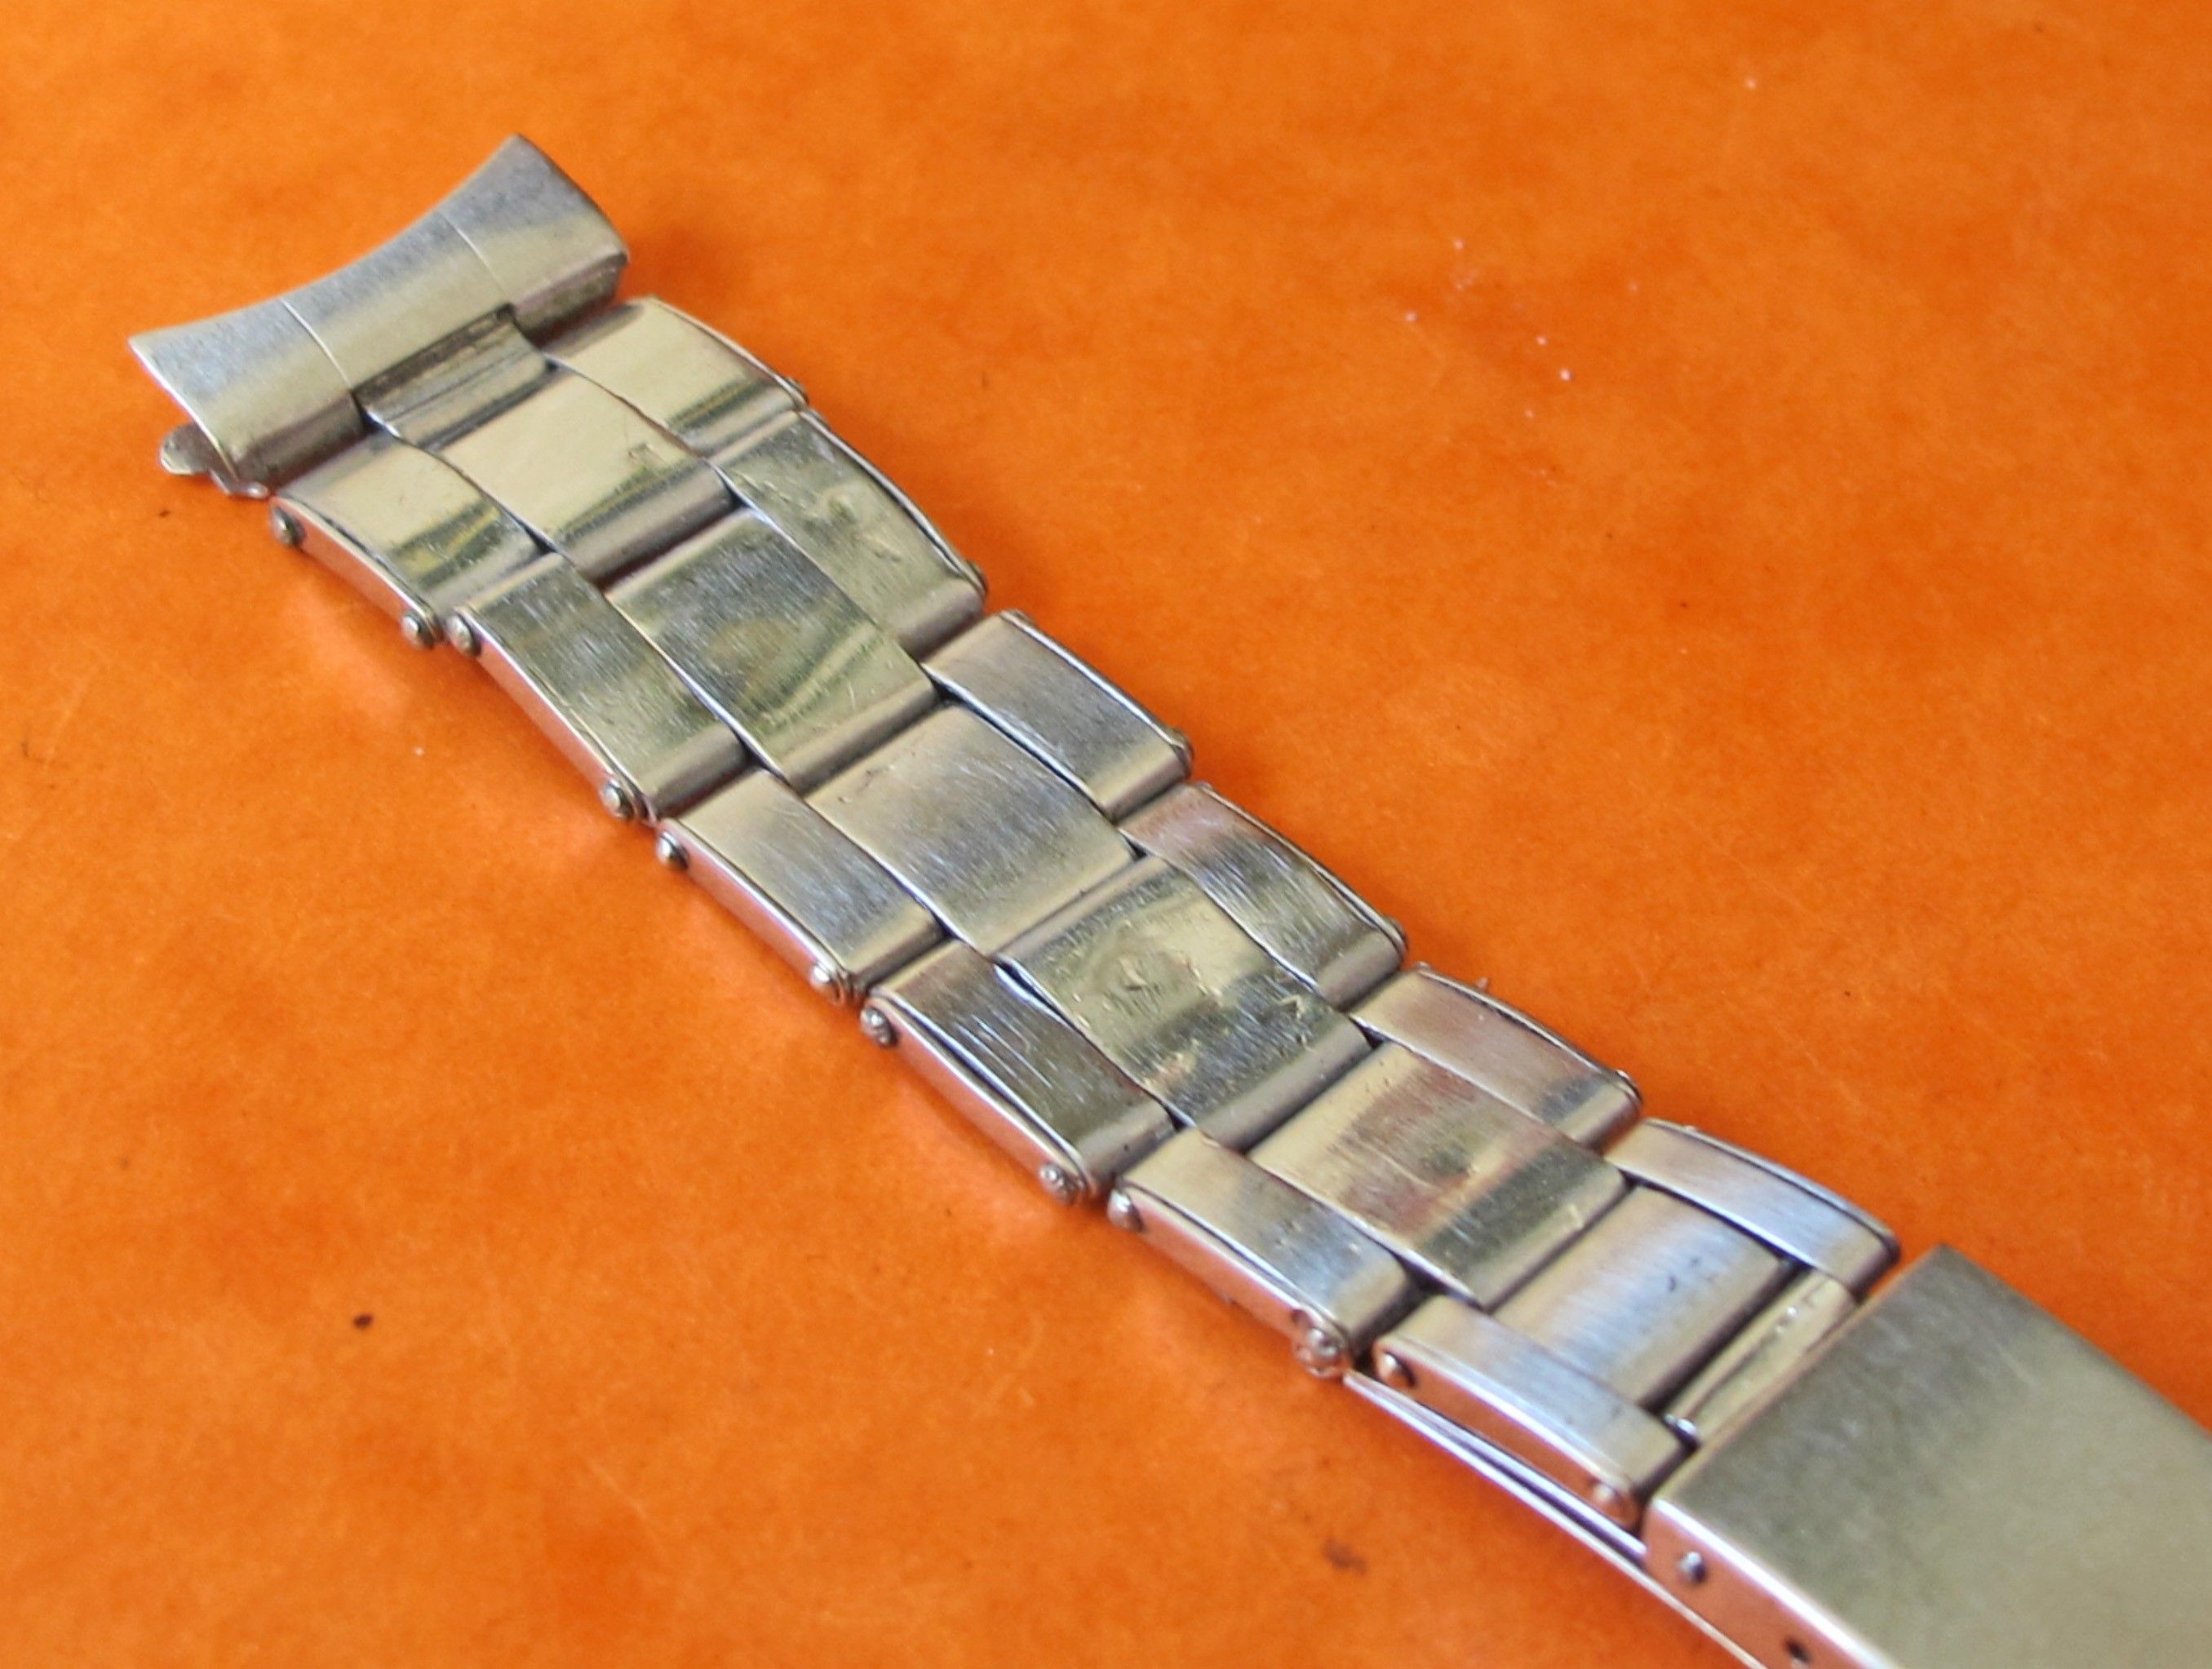 18mm Jubilee WatchBand Bracelet With Oyster Deployment Clasp For Seiko 5  SNK361 | eBay